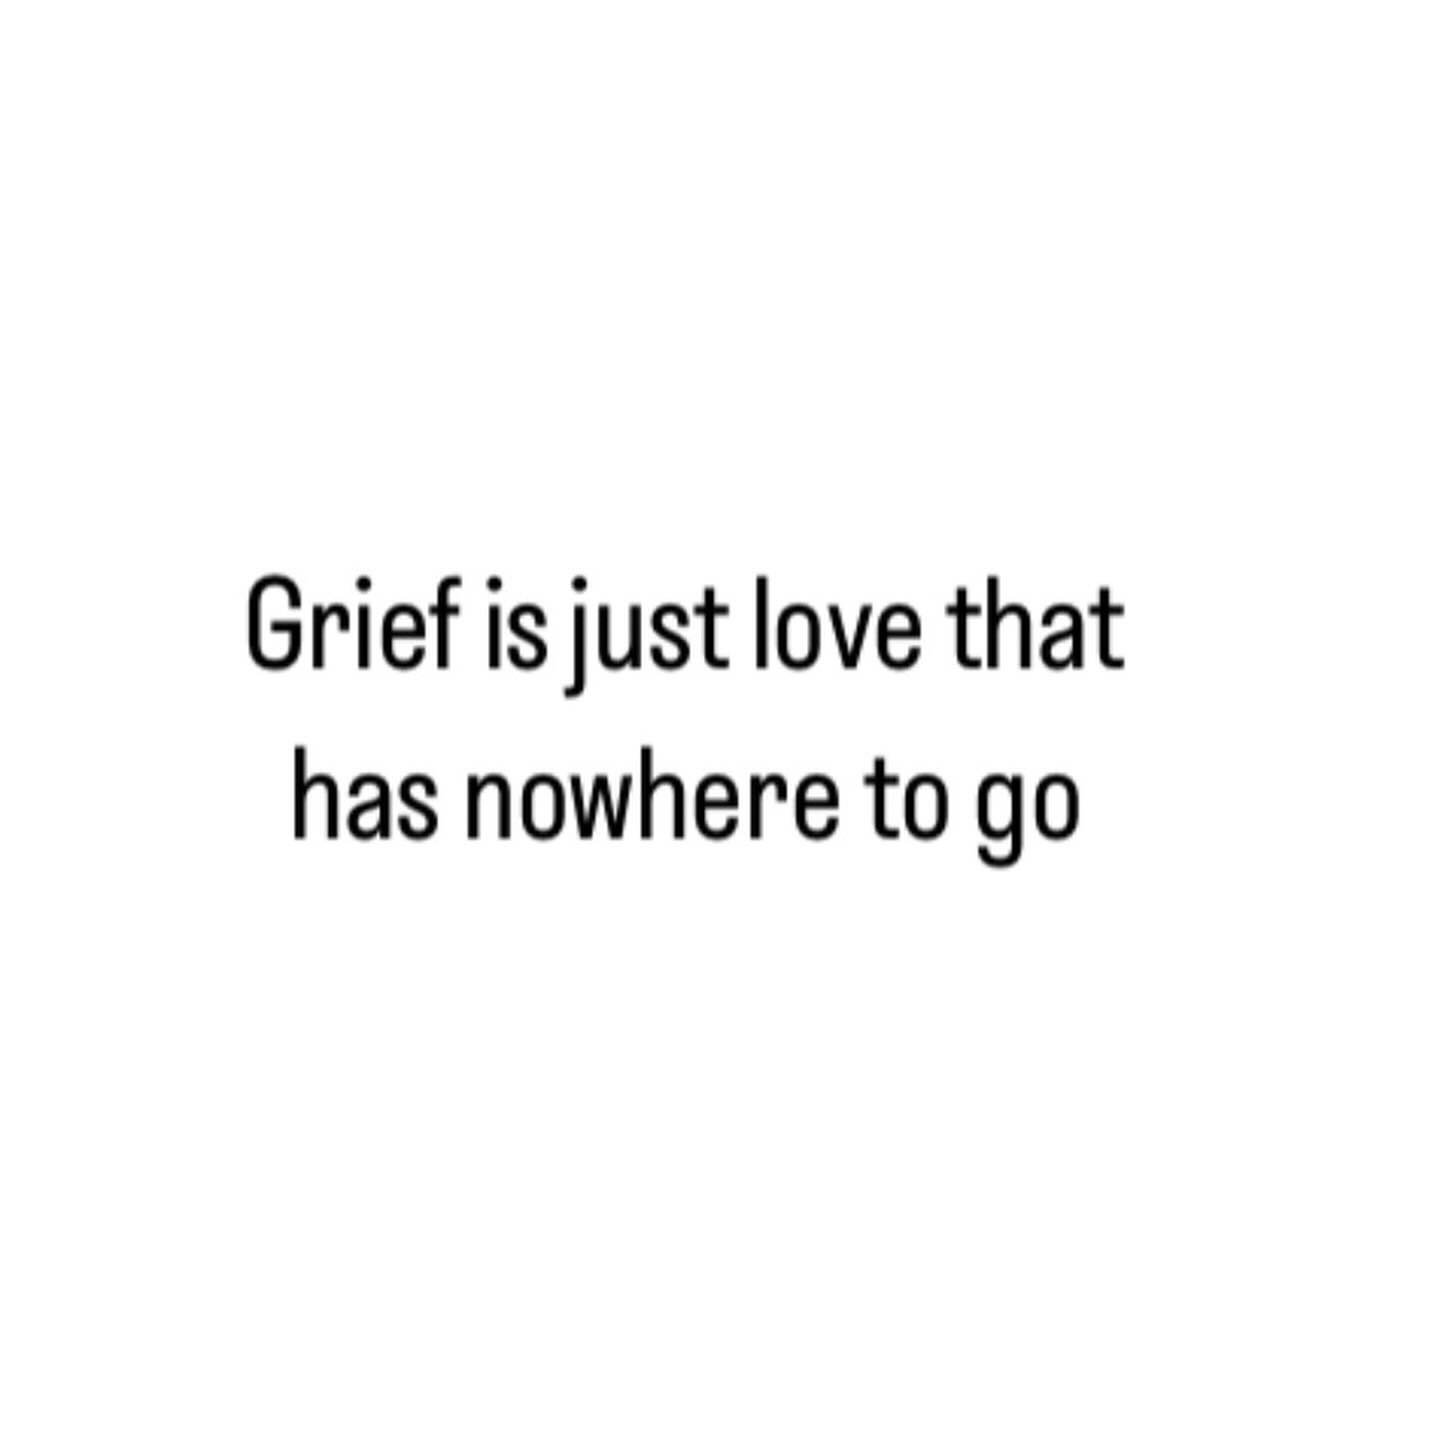 Currently&hellip; ✨🤍✨ 

Grief is love that has nowhere to go 🤍✨

If there&rsquo;s ONE thing that Simon&rsquo;s passing is really anchoring in for me and reminding me of, 
It&rsquo;s this&hellip;

LIVE!! 
Live your f*ing life. 
Love your life, 
Love